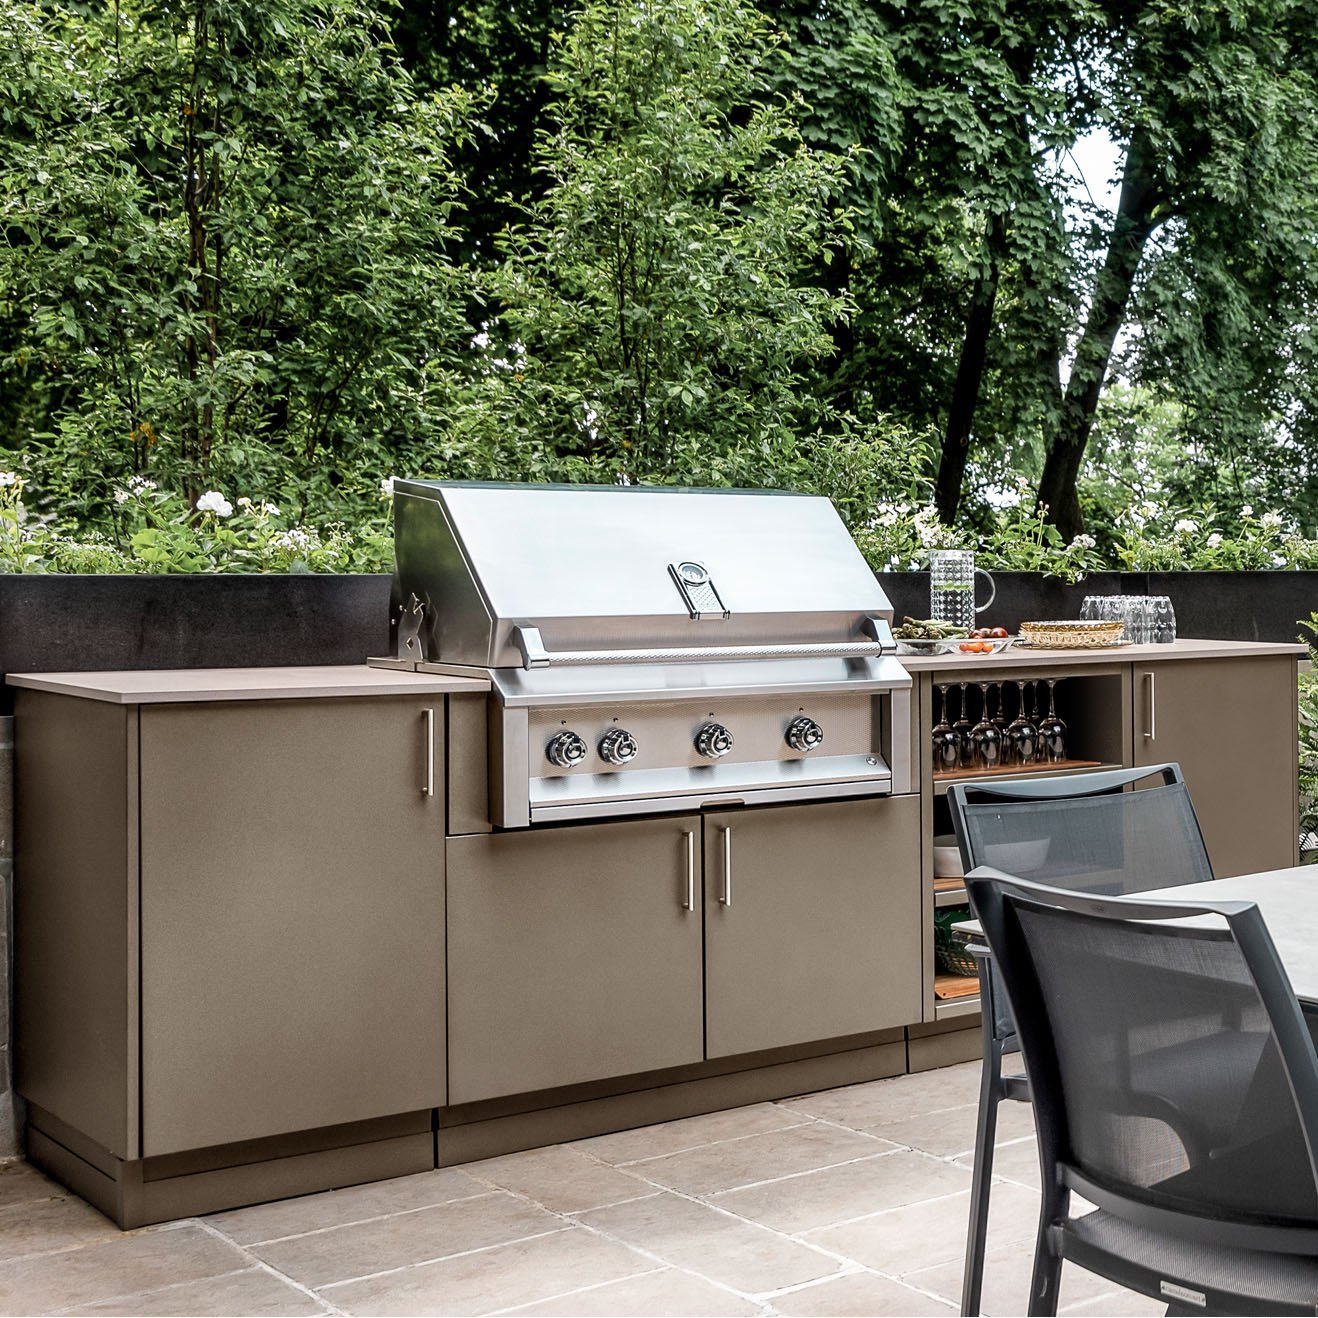 20 Outdoor Kitchen Countertop Ideas and Installation Tips